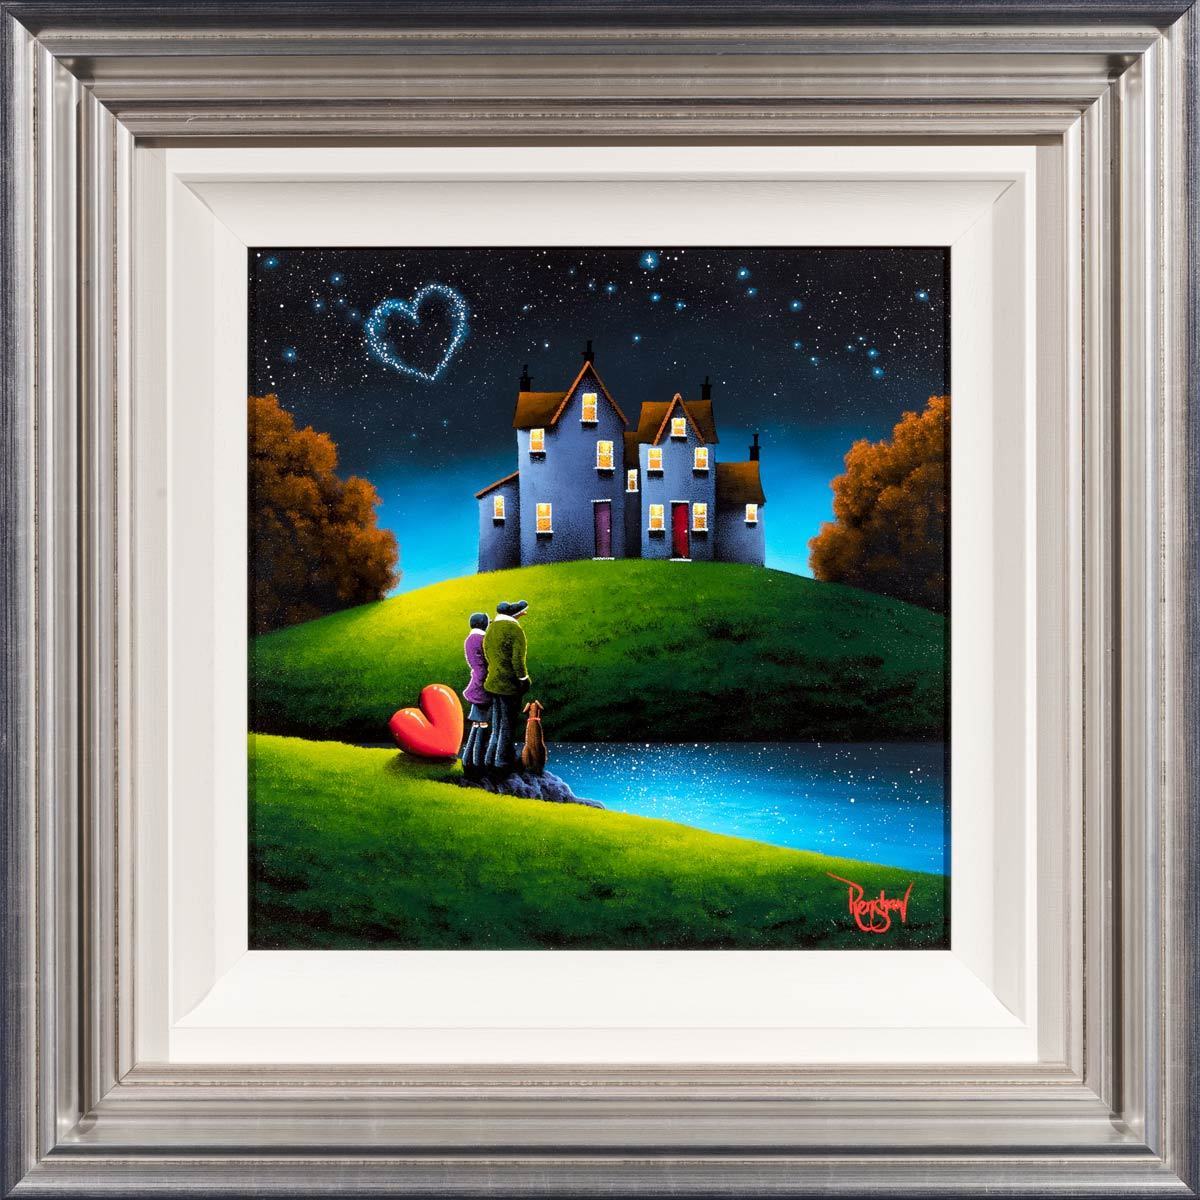 Our House On The Hill - Original David Renshaw Framed